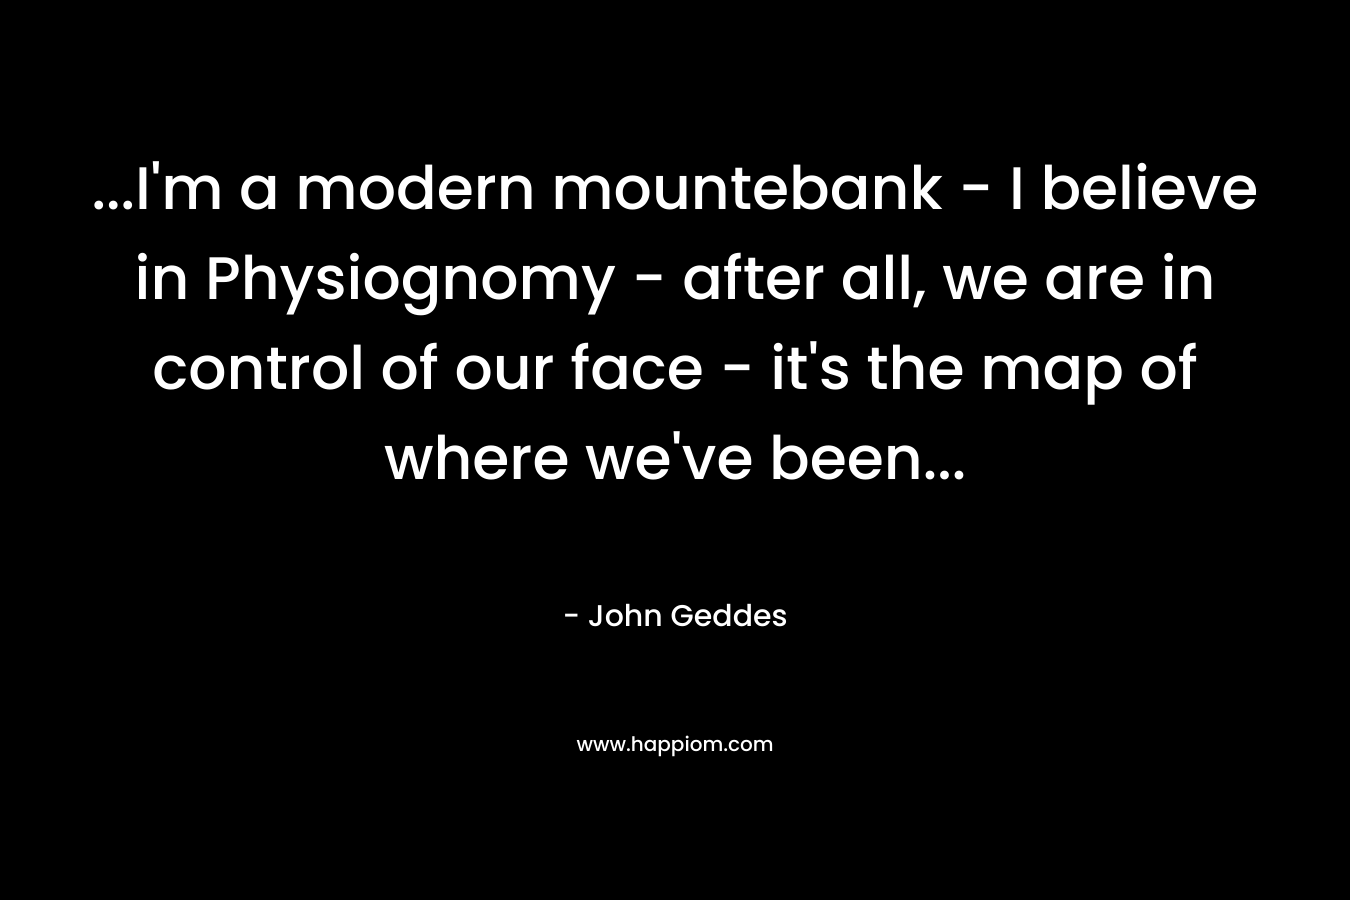 …I’m a modern mountebank – I believe in Physiognomy – after all, we are in control of our face – it’s the map of where we’ve been… – John Geddes